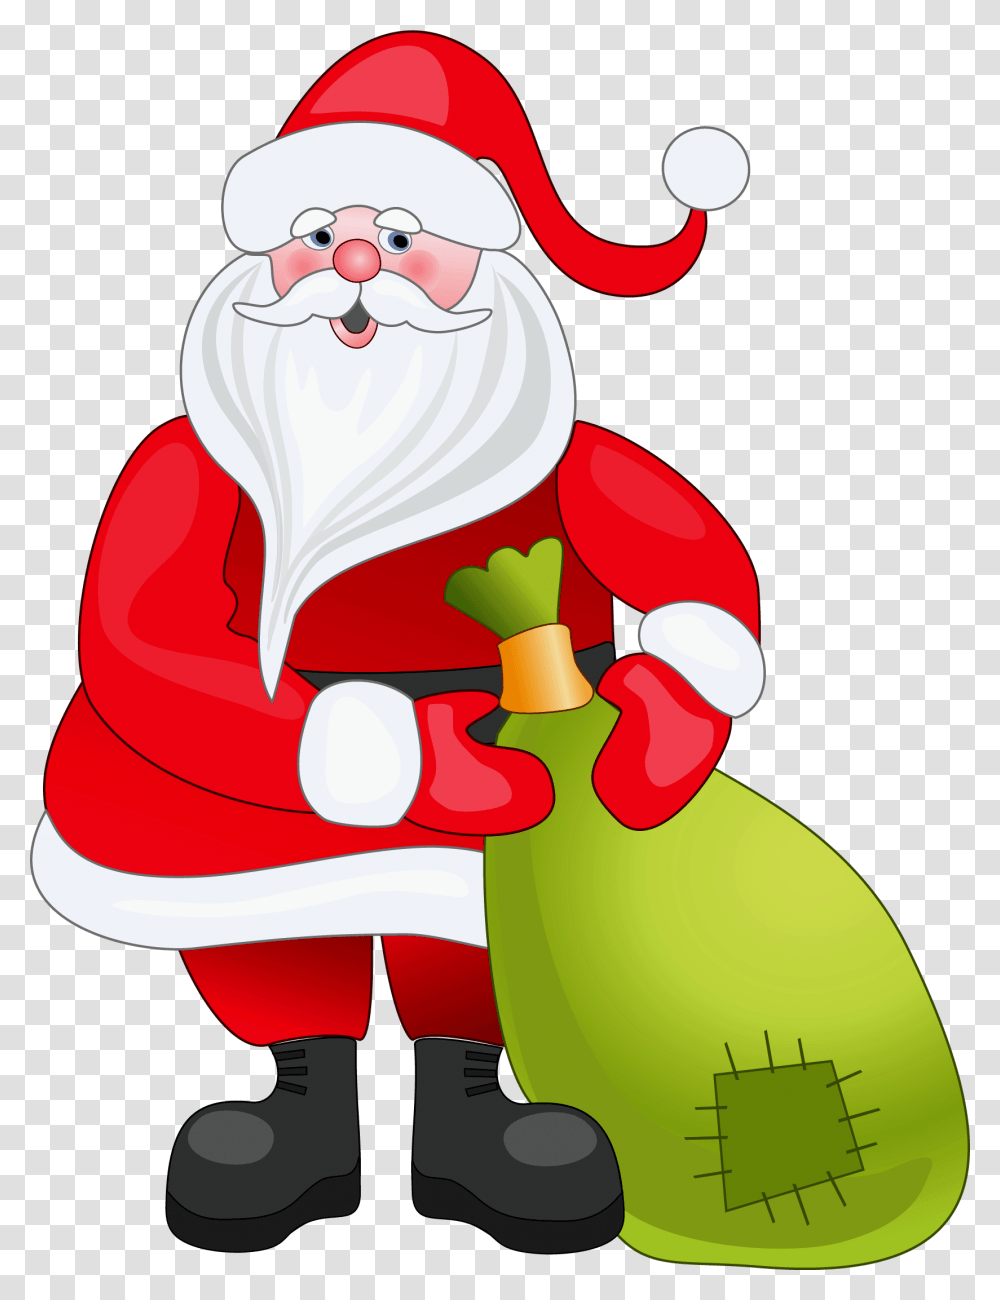 Santa Claus Image Free Download Santa Claus You've Been Sacked, Snowman, Winter, Outdoors, Nature Transparent Png